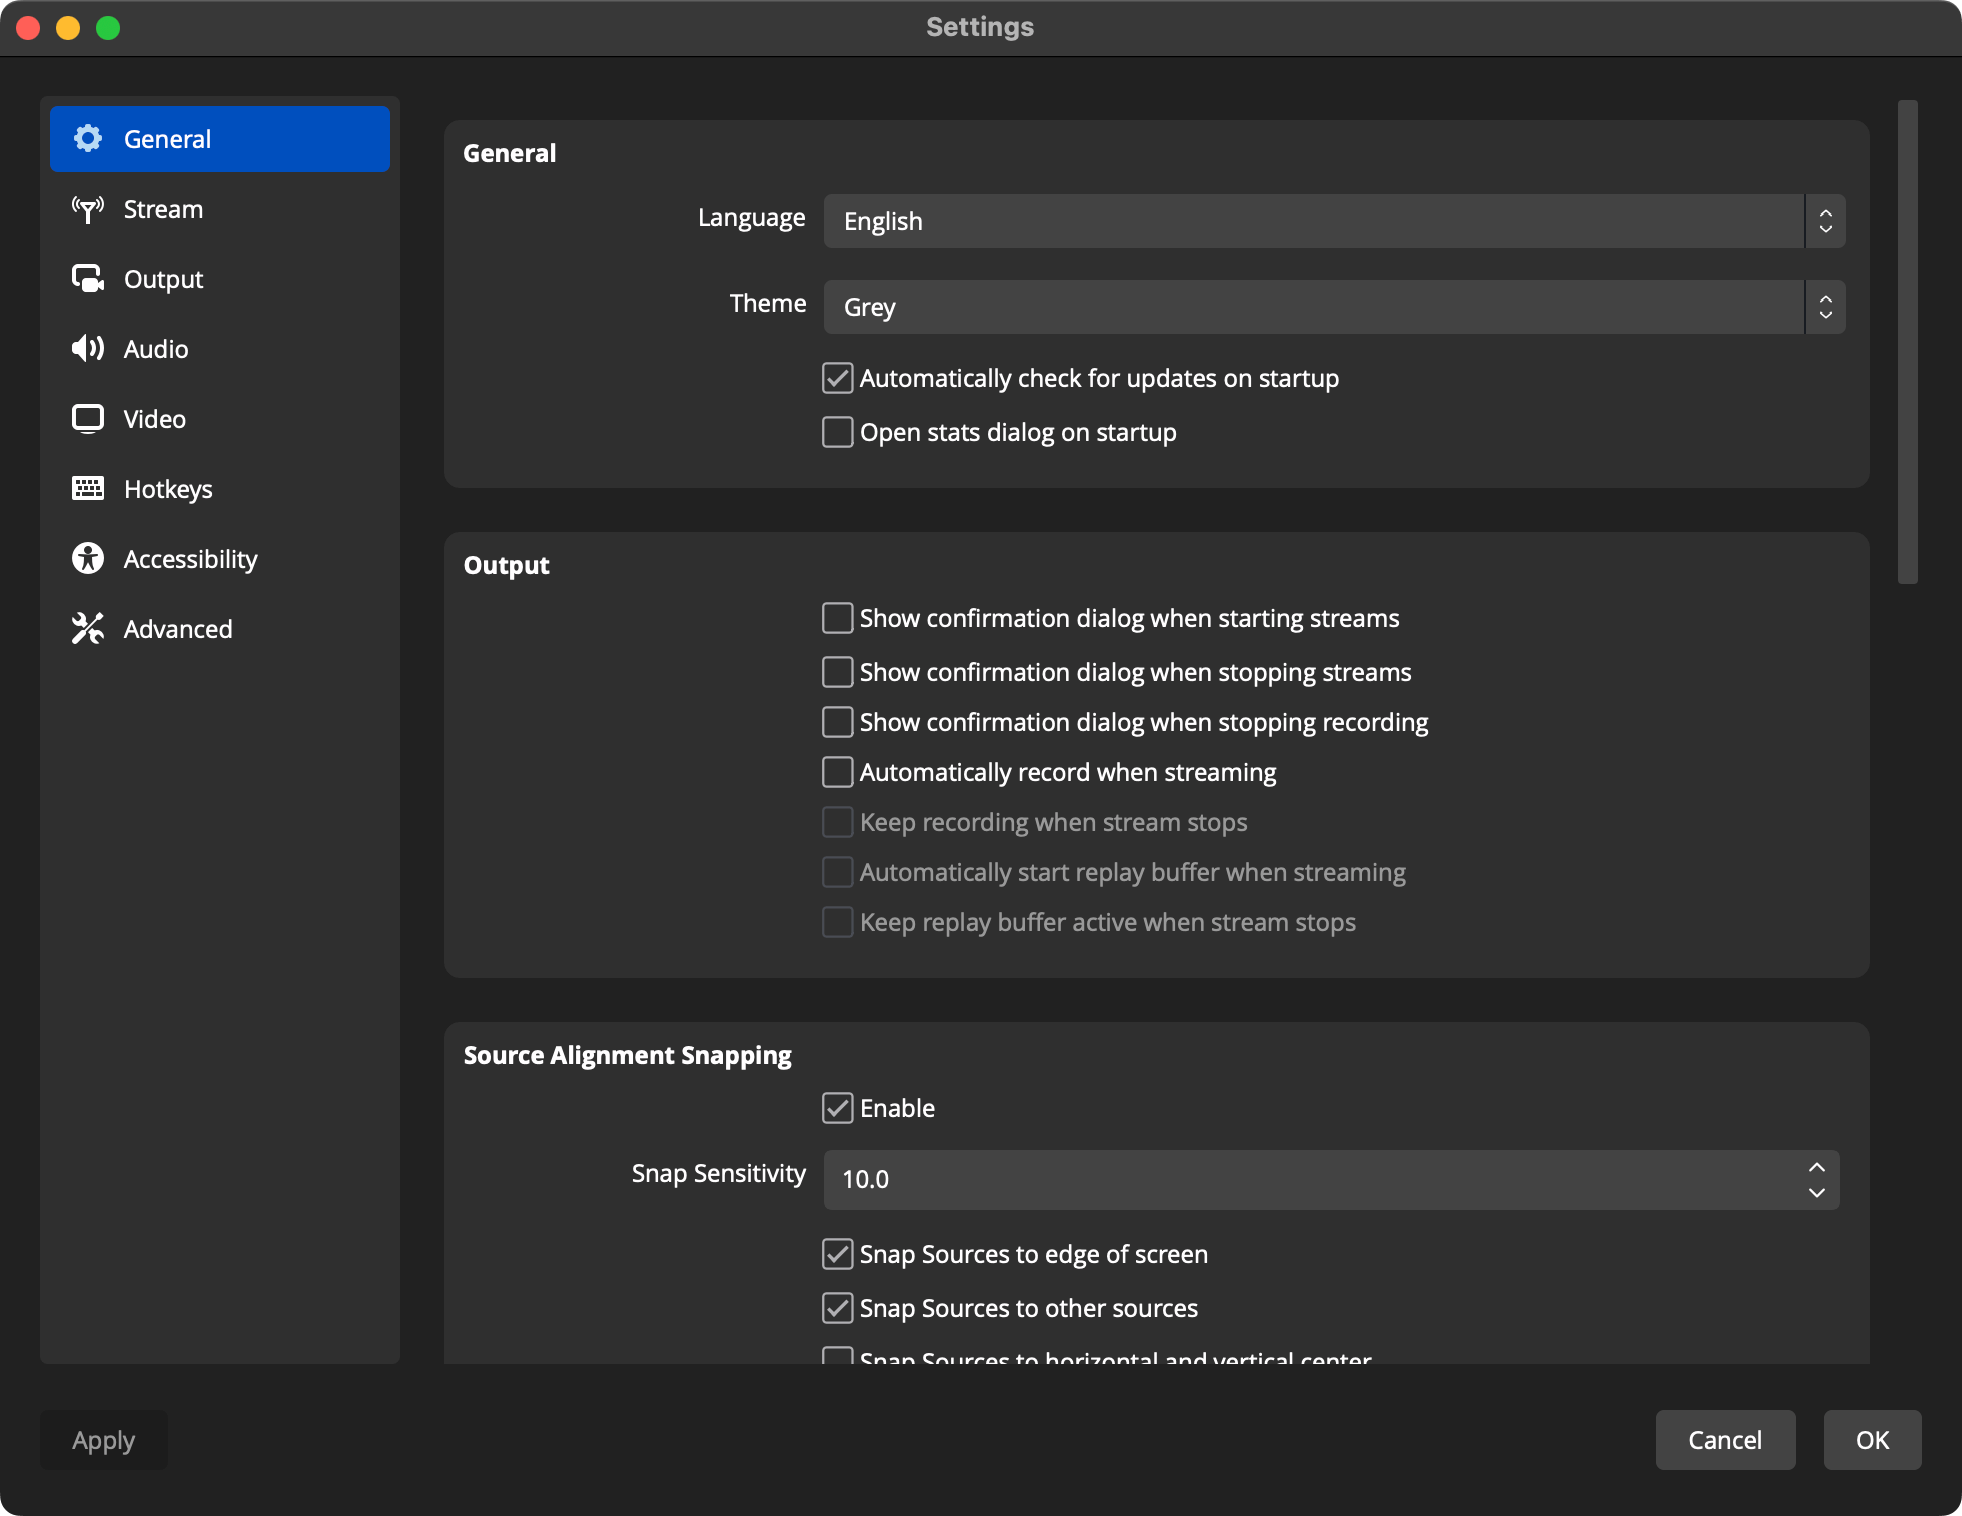 OBS Studio's settings window showing the Grey theme